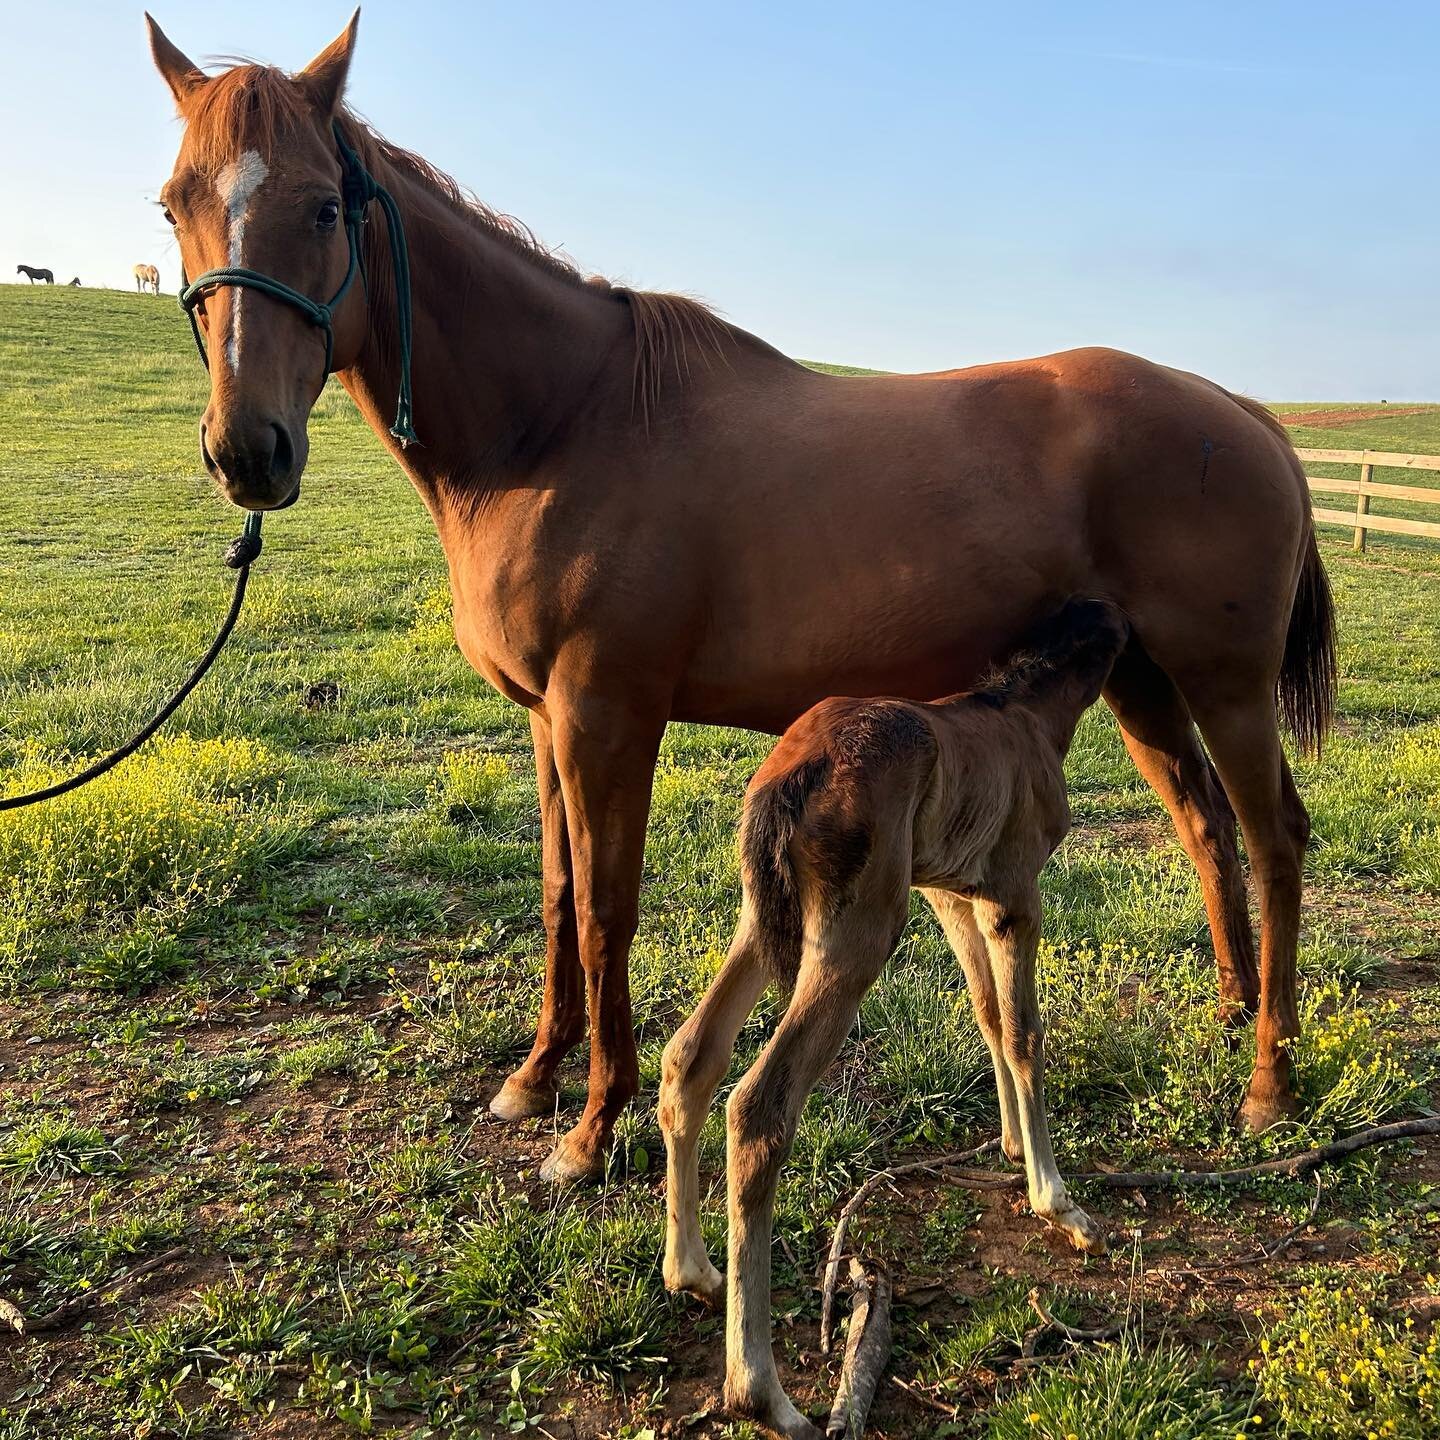 One day shy of a full year being pregnant, &ldquo;Royal Sighting&rdquo; gave us an unbelievably enormous colt by &ldquo;Awesome Charlie&rdquo;! This picture doesn&rsquo;t do him justice at all. How he fit inside that belly is a mystery to me!
.
.
@sp